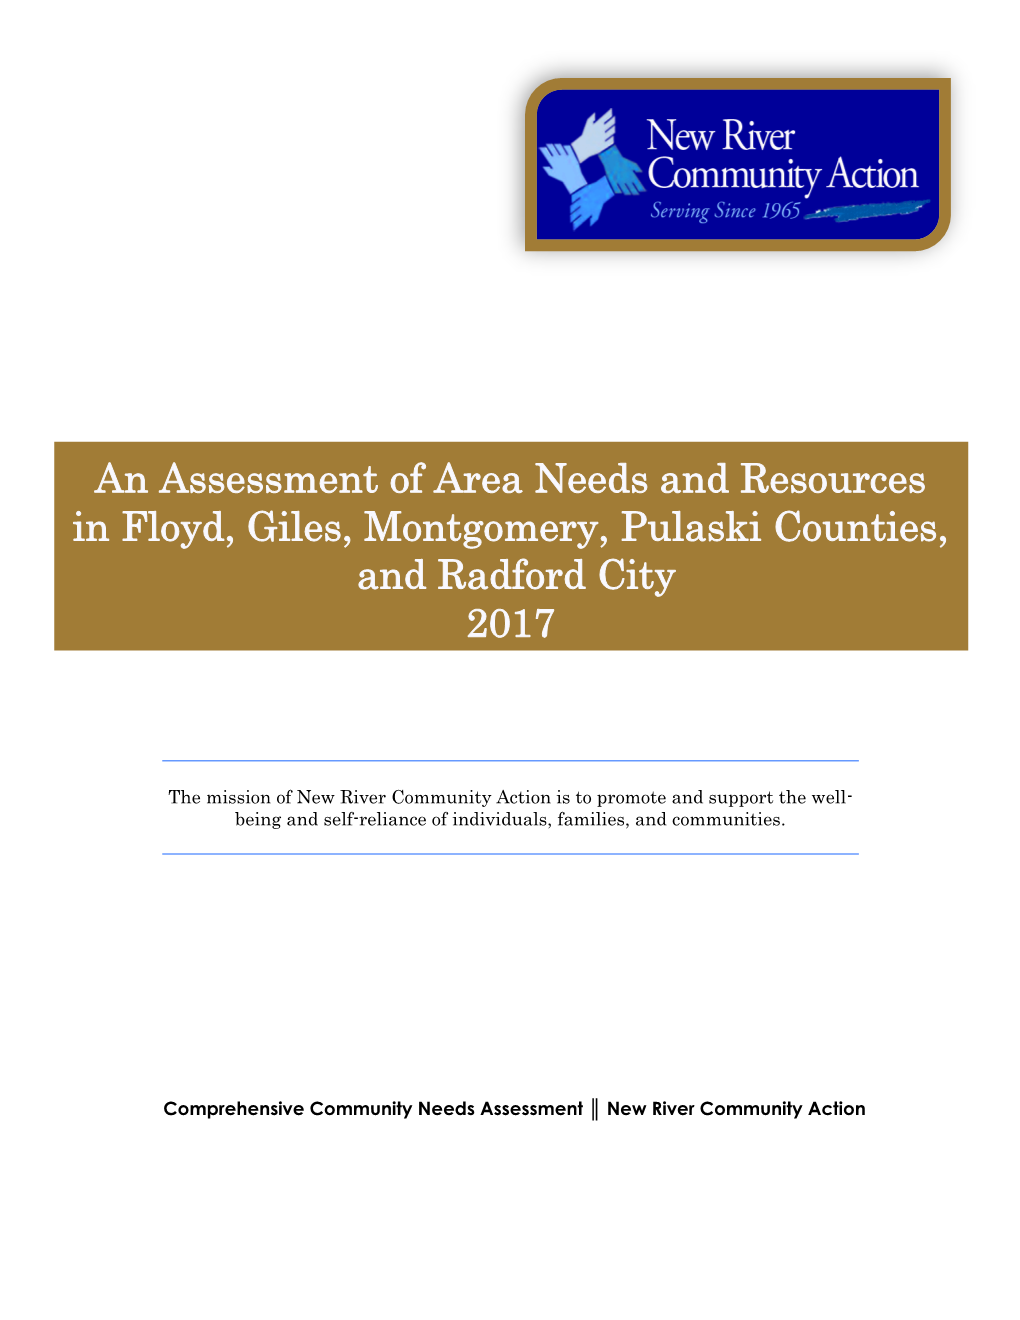 An Assessment of Area Needs and Resources in Floyd, Giles, Montgomery, Pulaski Counties